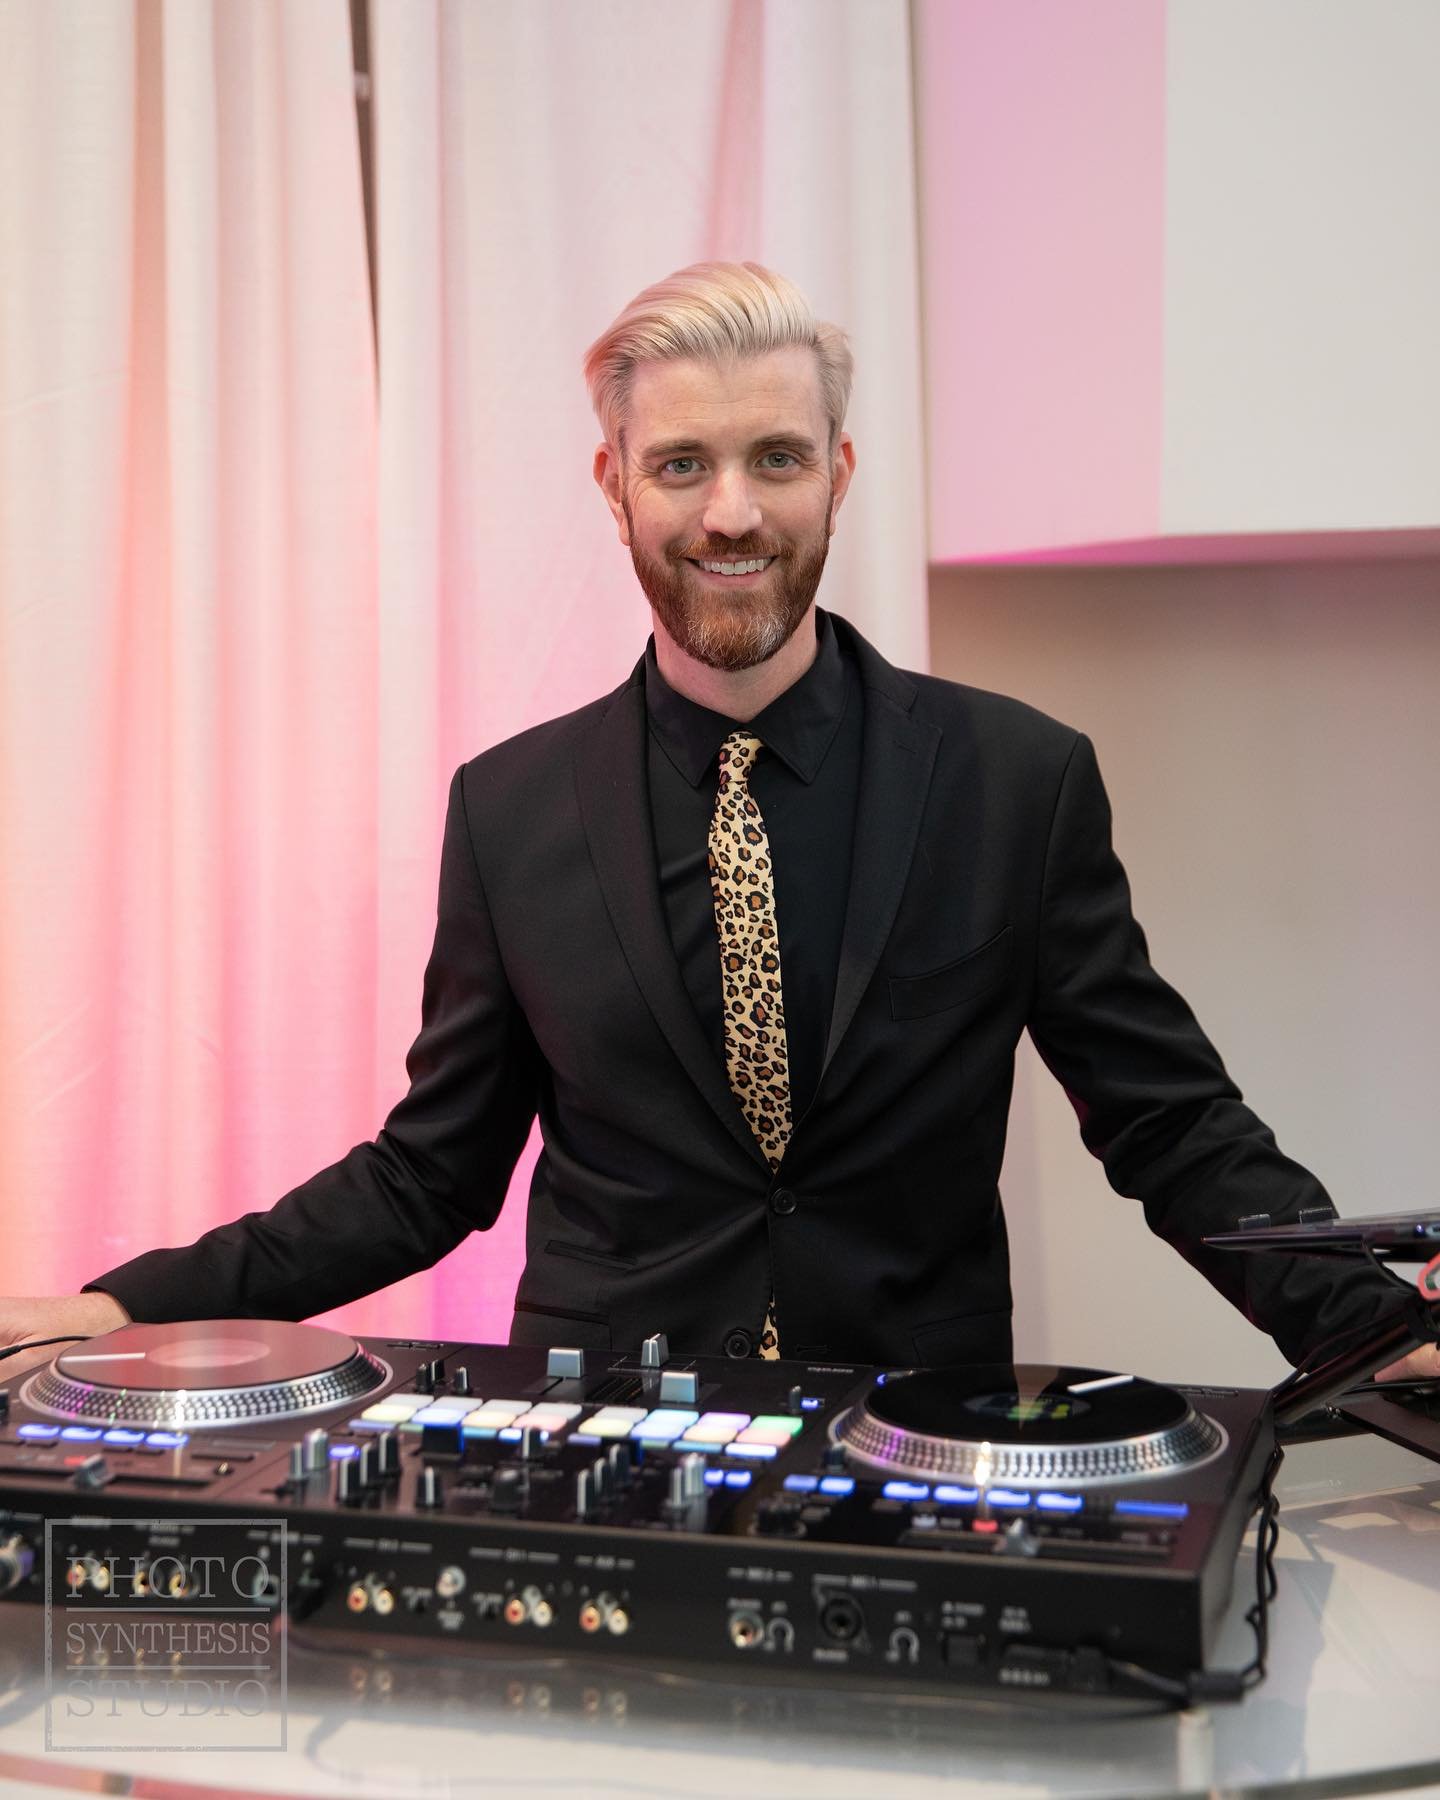 Let&rsquo;s address the elephant in the room&hellip; I ordered this leopard-print tie so I could match @mpigeorgia&rsquo;s Spring Summit at Zoo Atlanta. 

Photo: @photosynthesisstudio 

#DJ&nbsp;#DJKrieger&nbsp;#KriegerTheDJ&nbsp;#djing&nbsp;#wedding